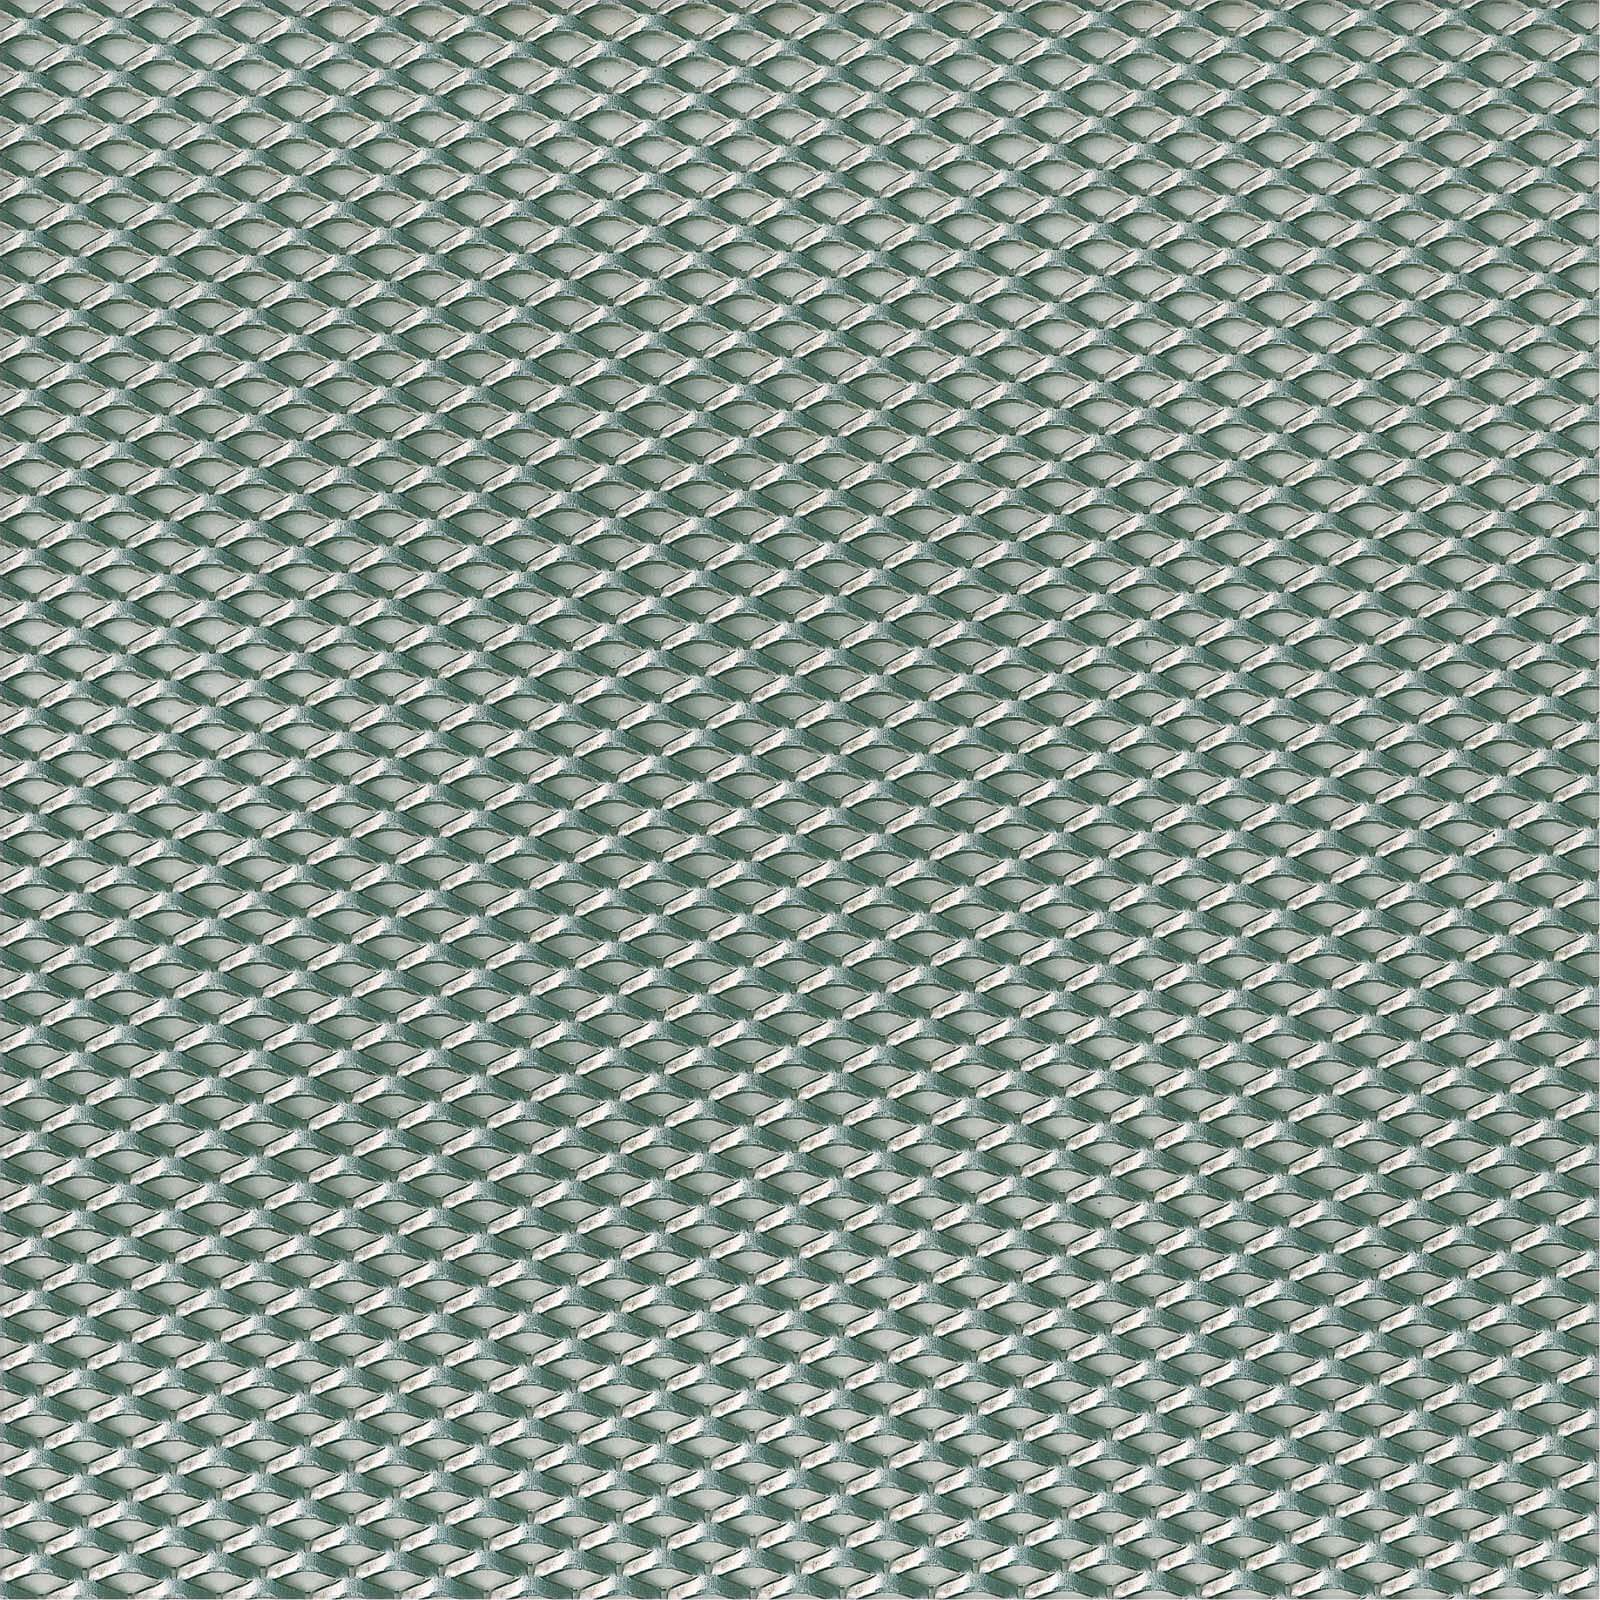 Perforated Steel Sheet - 300 x 1000 x 2.2mm